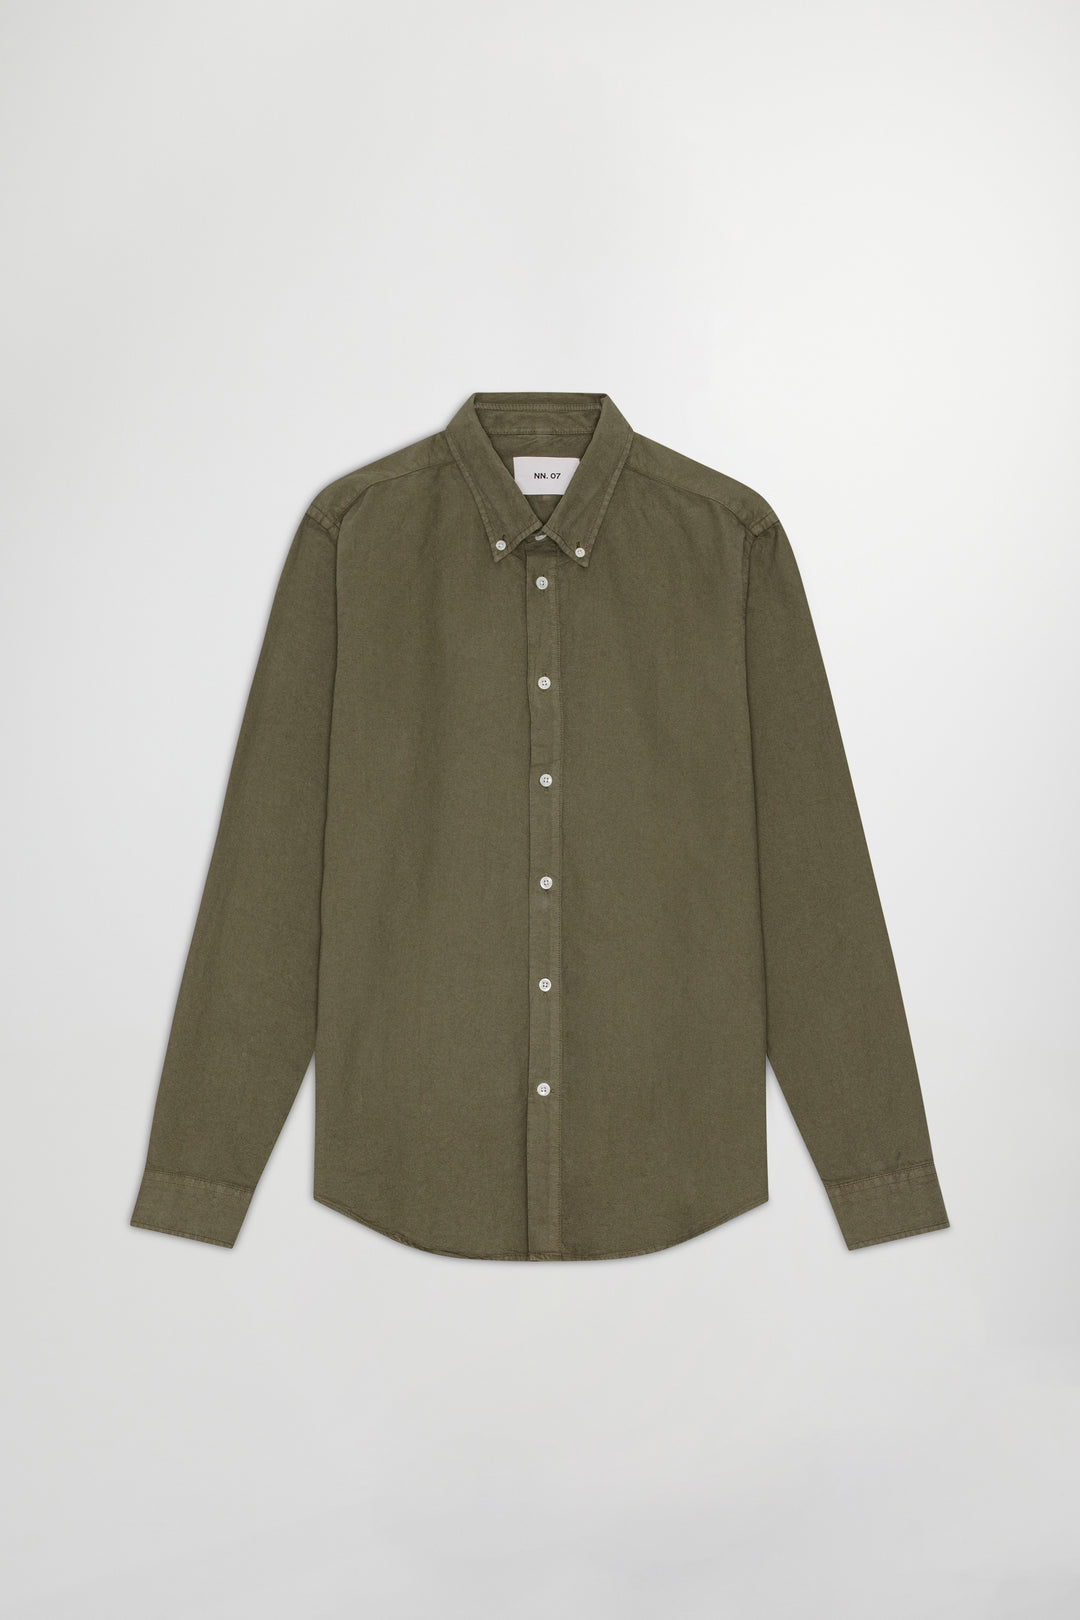 NN07 Arne No PKT 5725 Shirt in Capers | Buster McGee